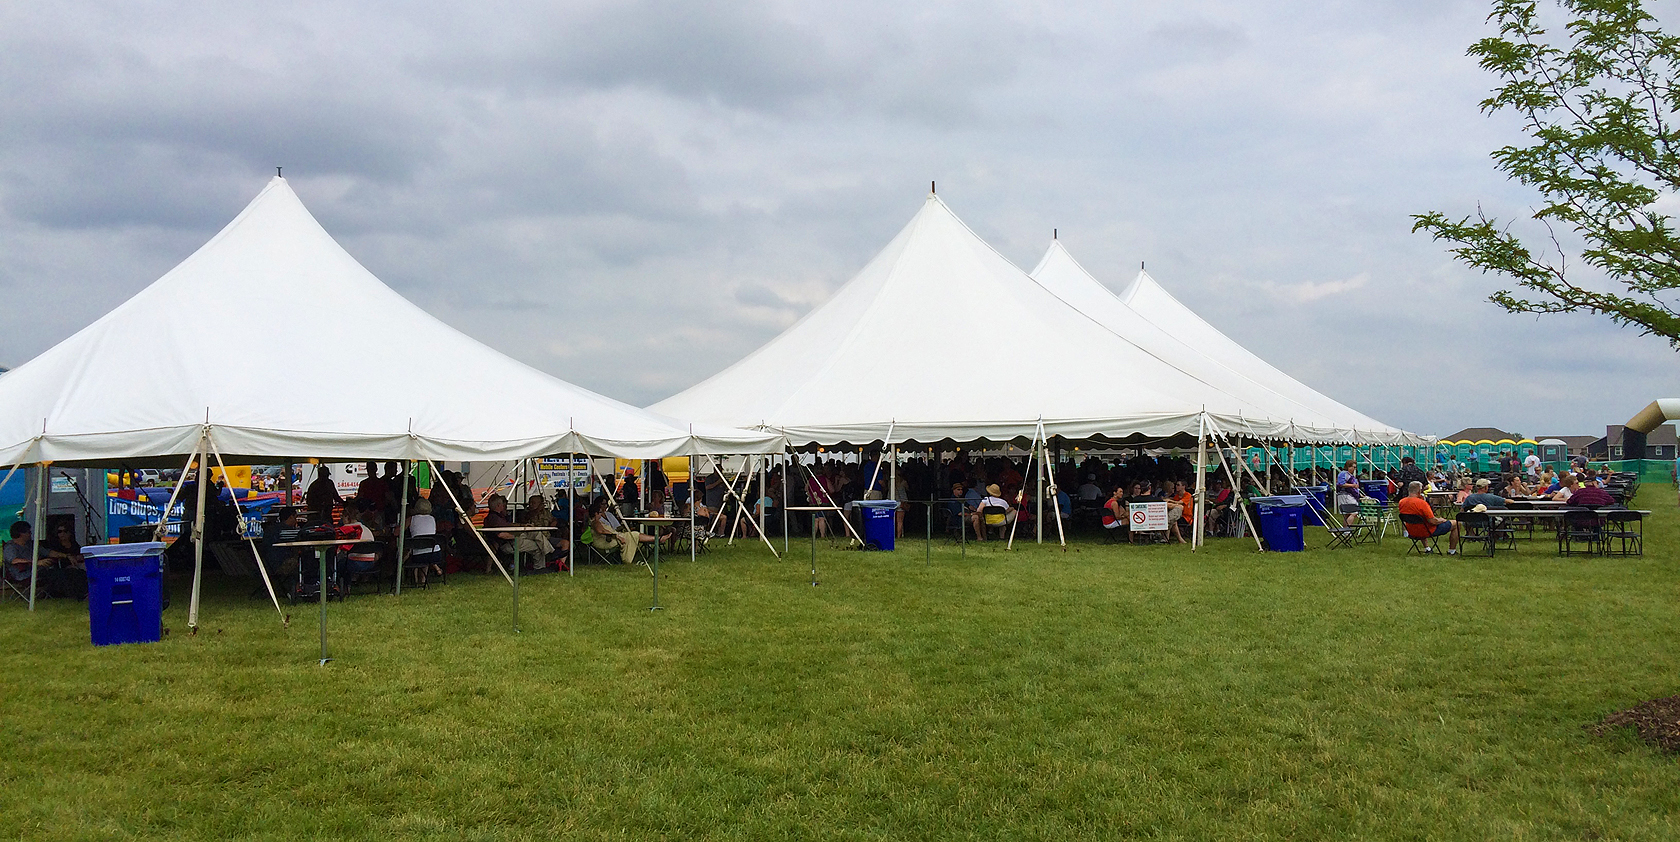 View of our 40' x 40' and 60' x 120' event tents at the North Liberty Blues and Barbecue festival in Iowa on July 12th 2014.